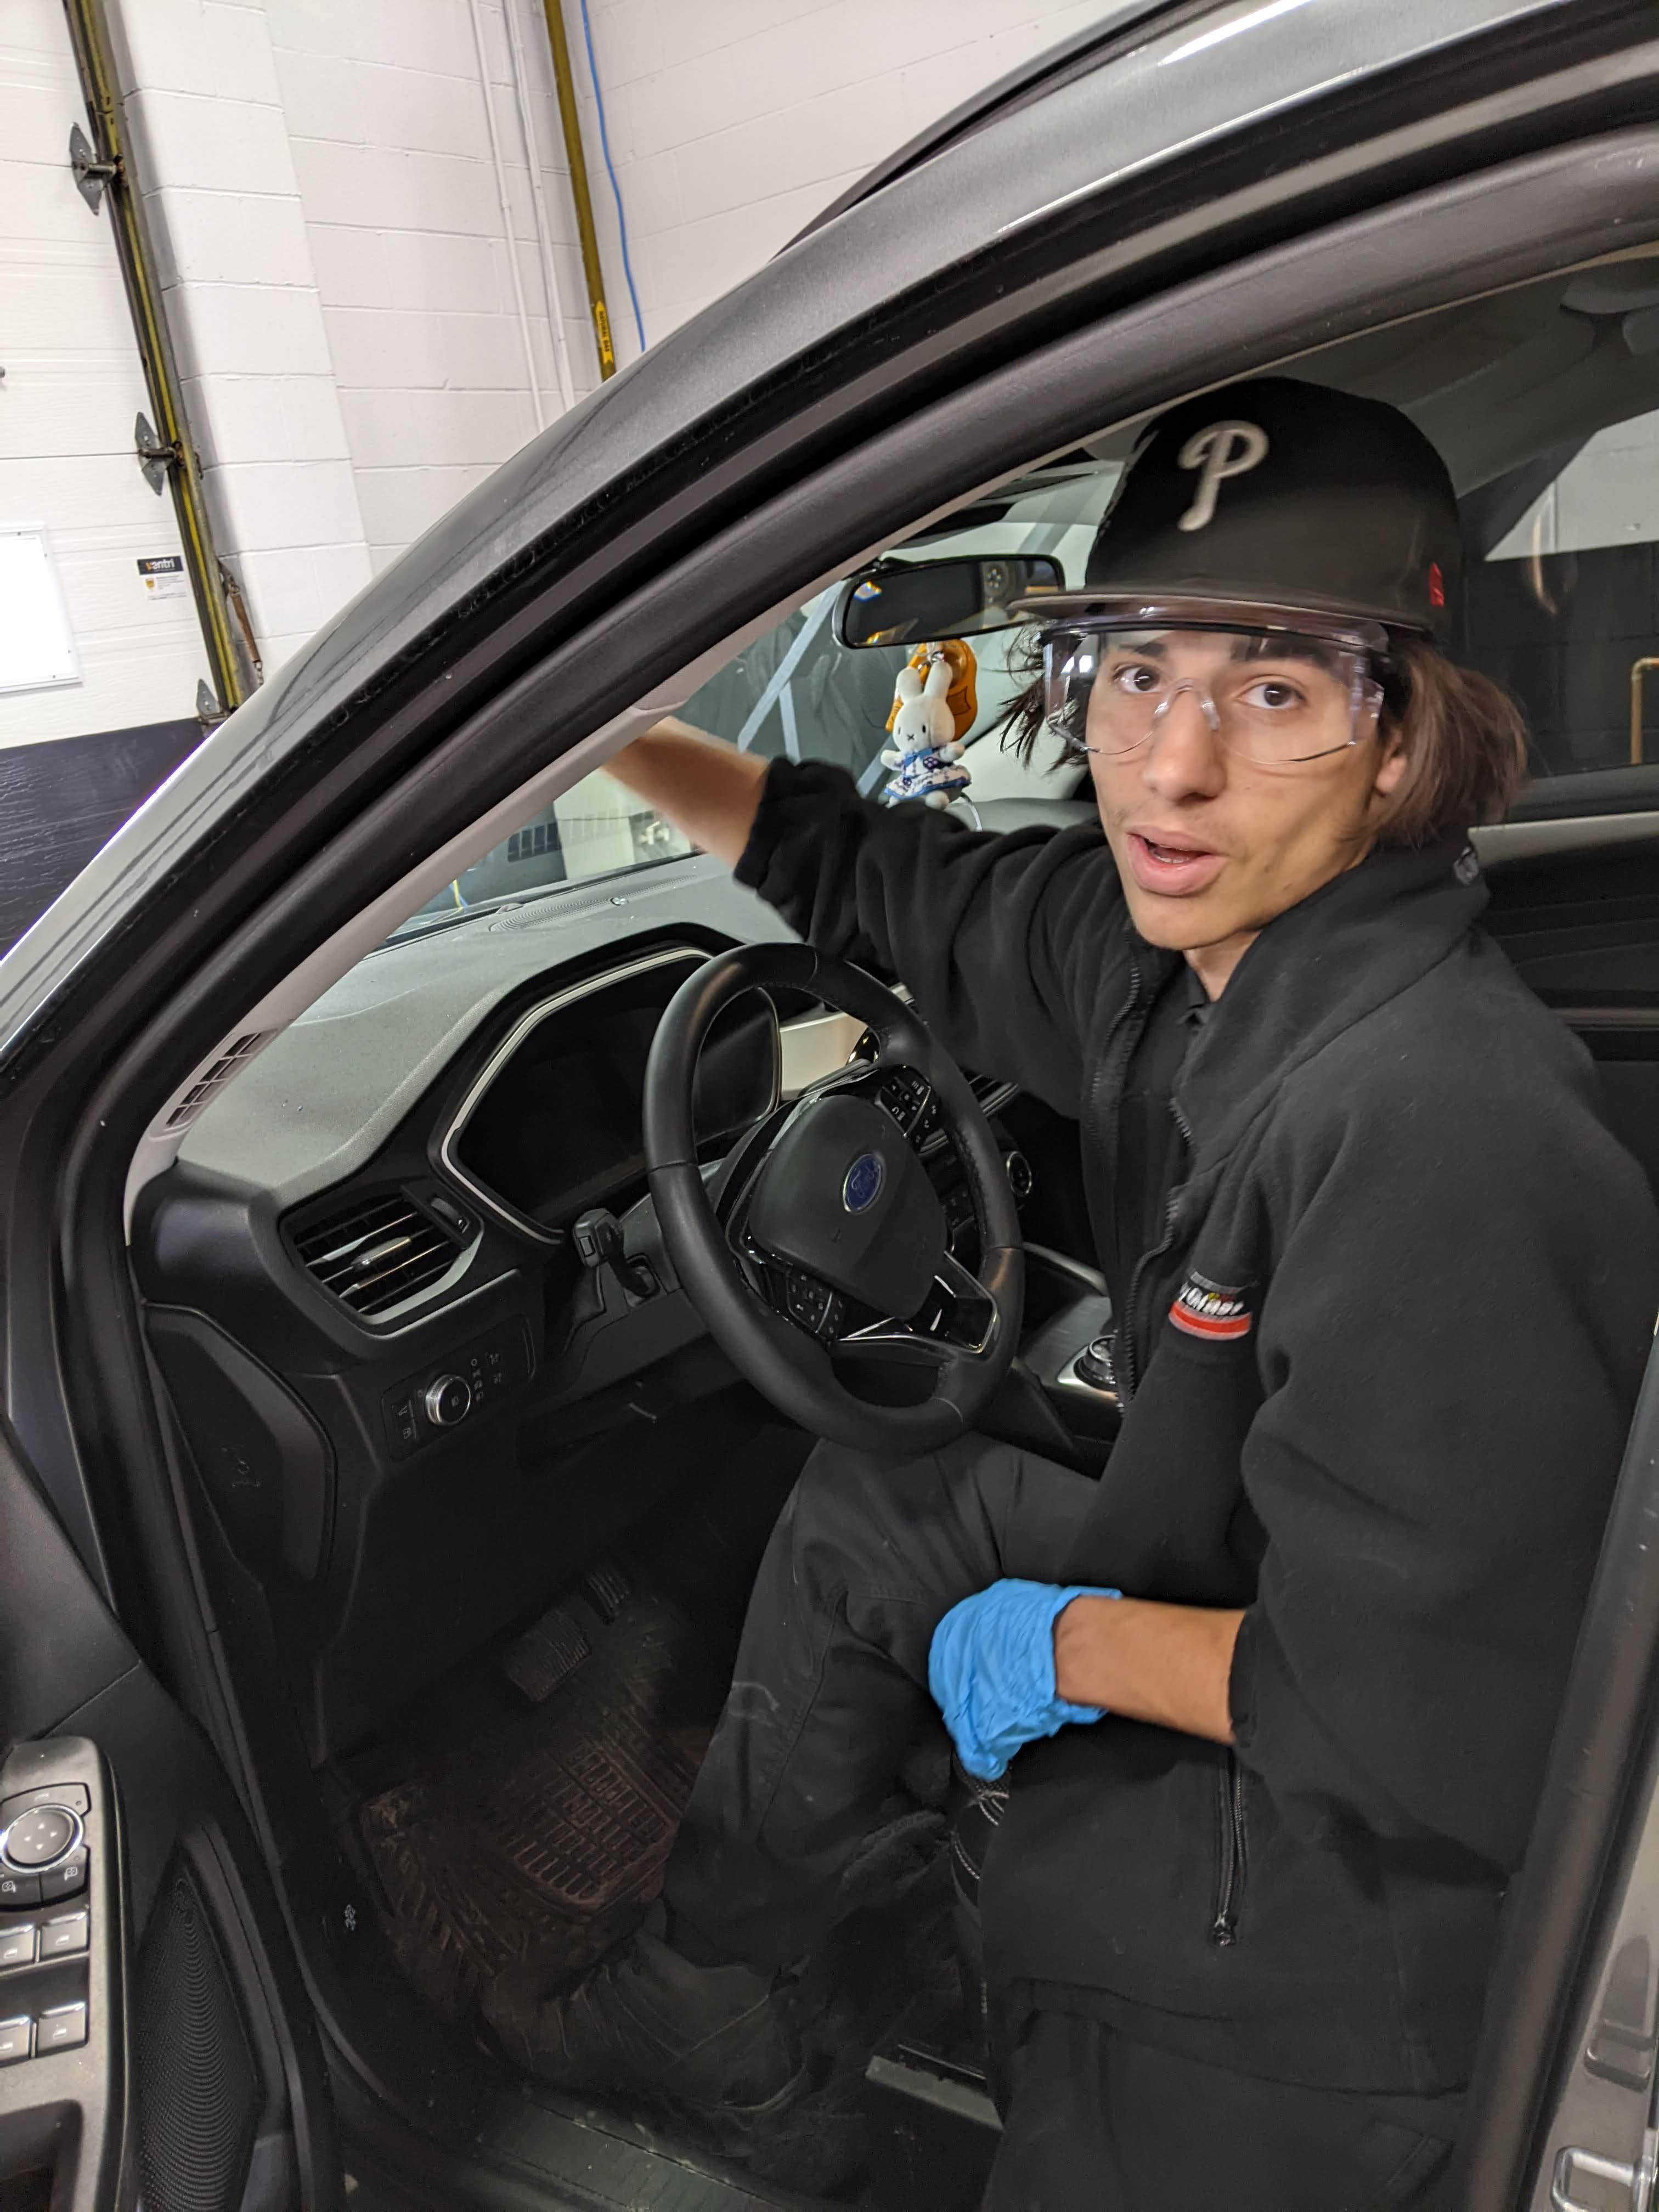 student sitting in car at work in a garage